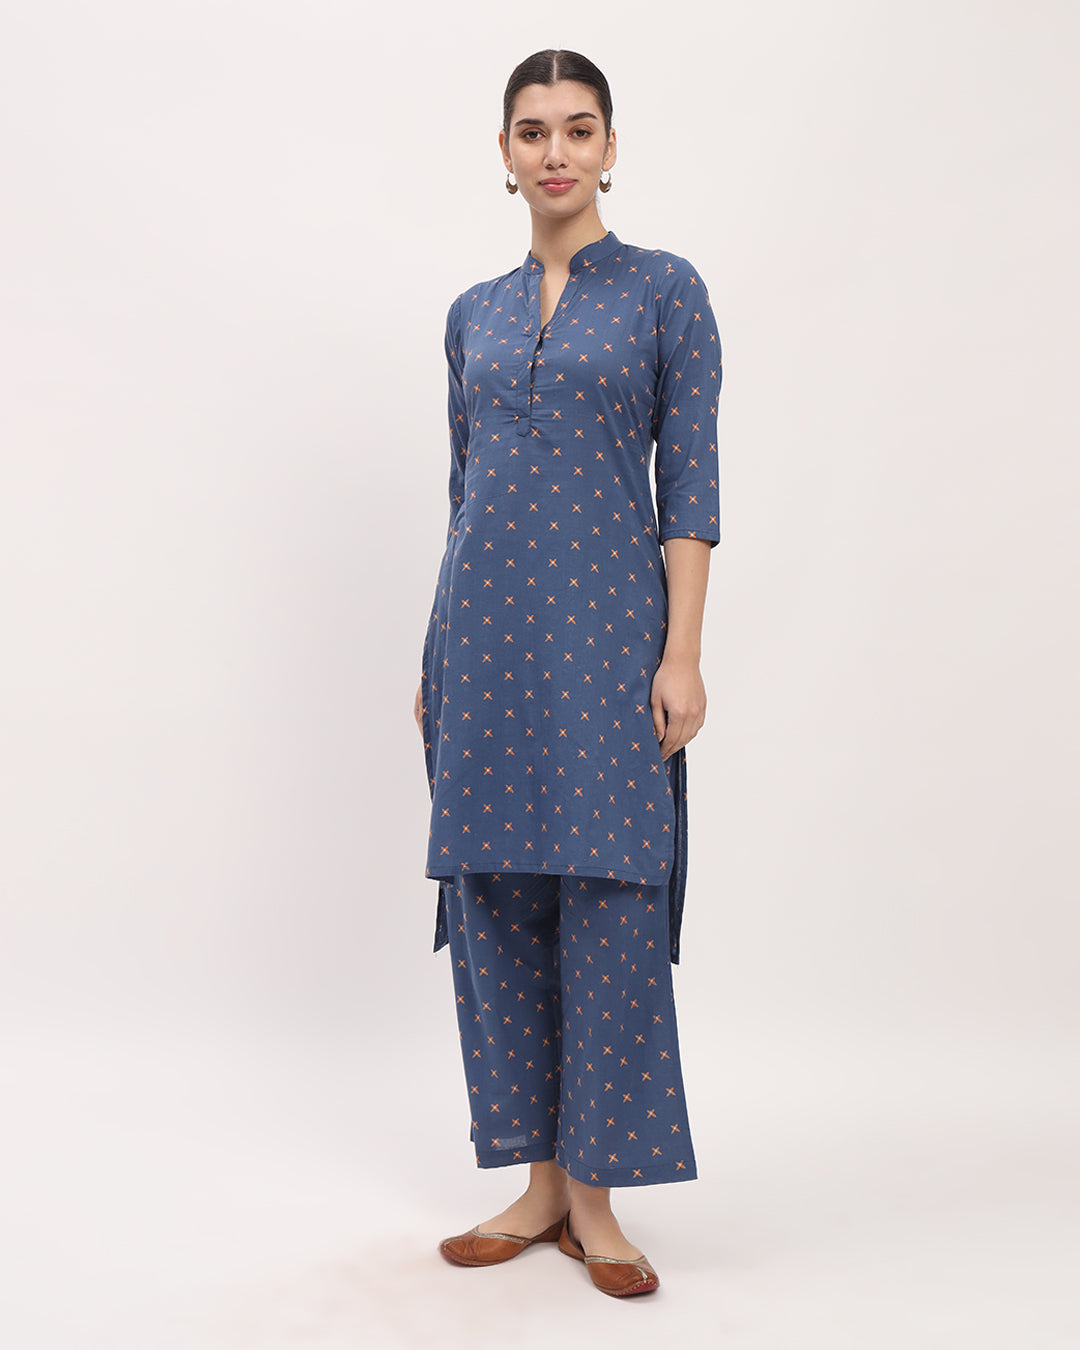 Combo: Lavender Paisley & Blue Starry High-Low Printed Kurta (Without Bottoms)